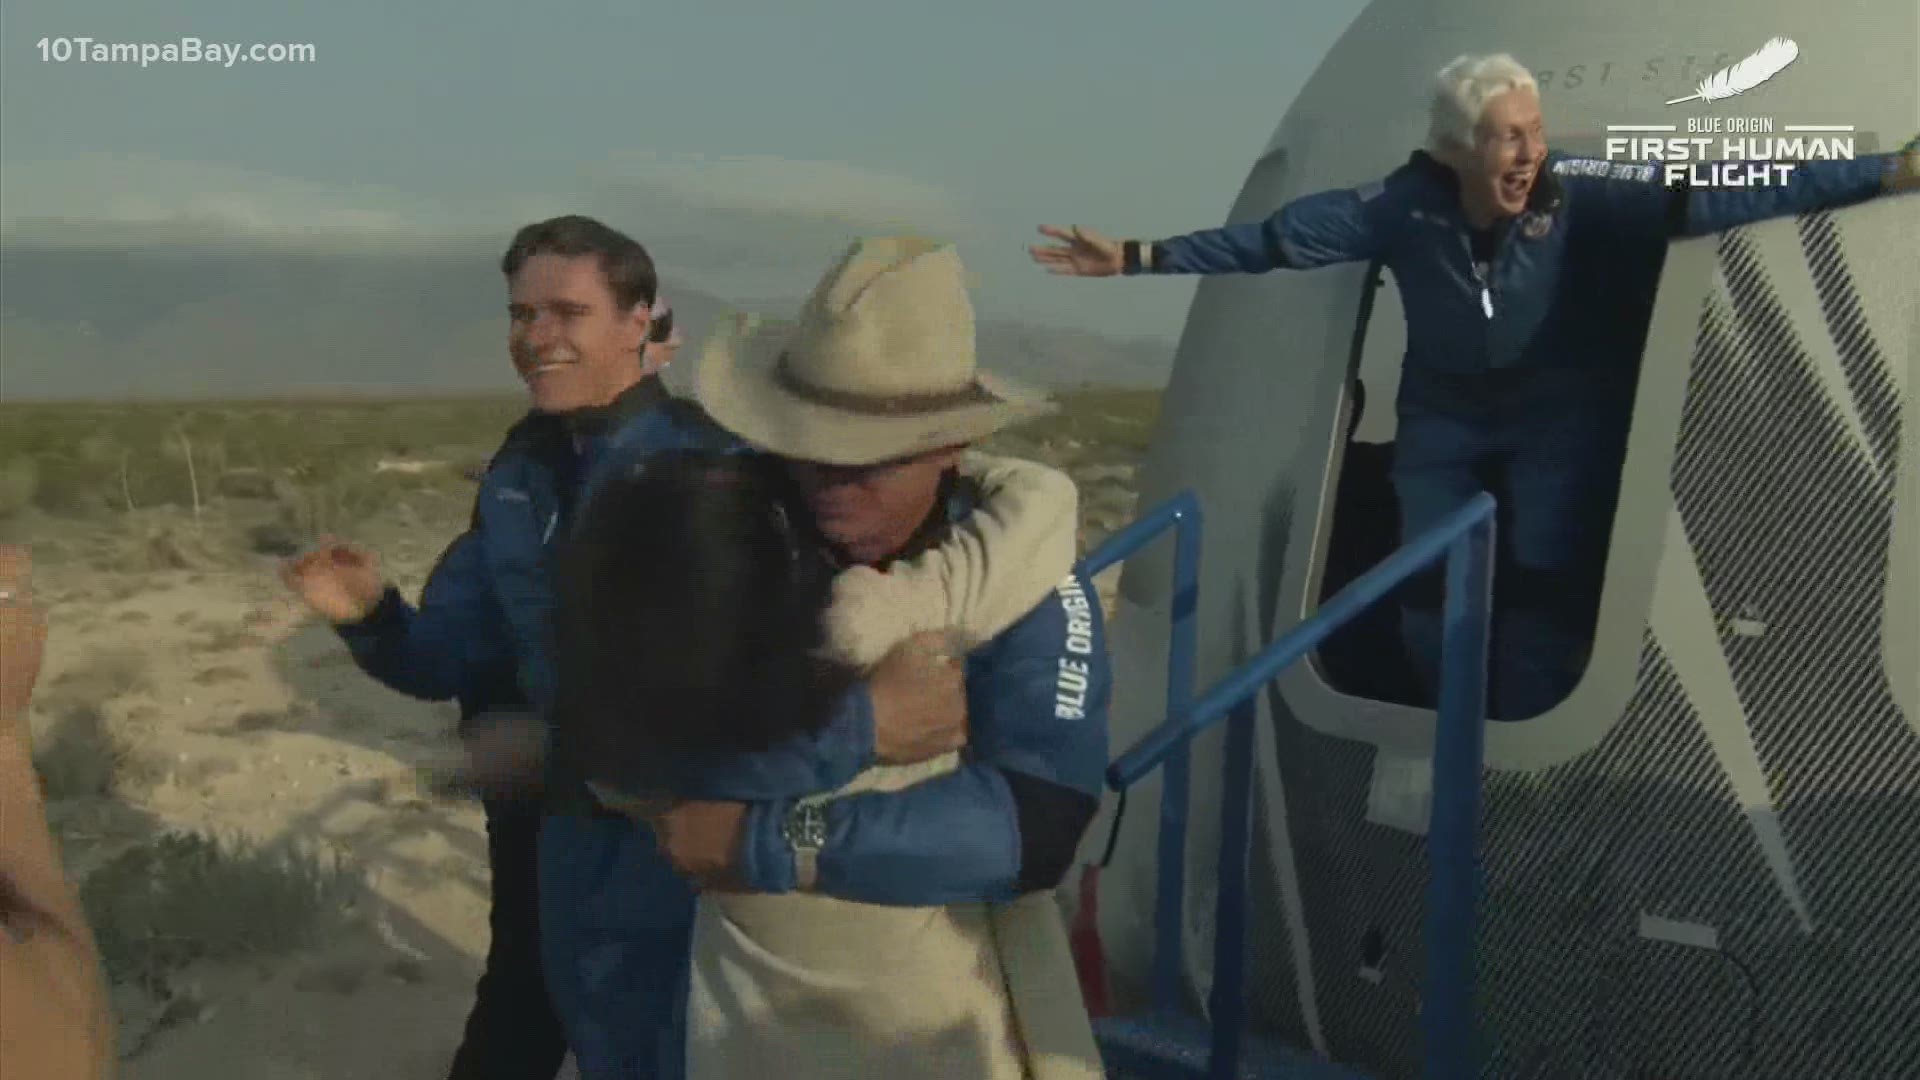 Billionaire Jeff Bezos, his brother Mark Bezos, Wally Funk, and Oliver Daemen step back onto Earth after Blue Origin's first successful human flight.